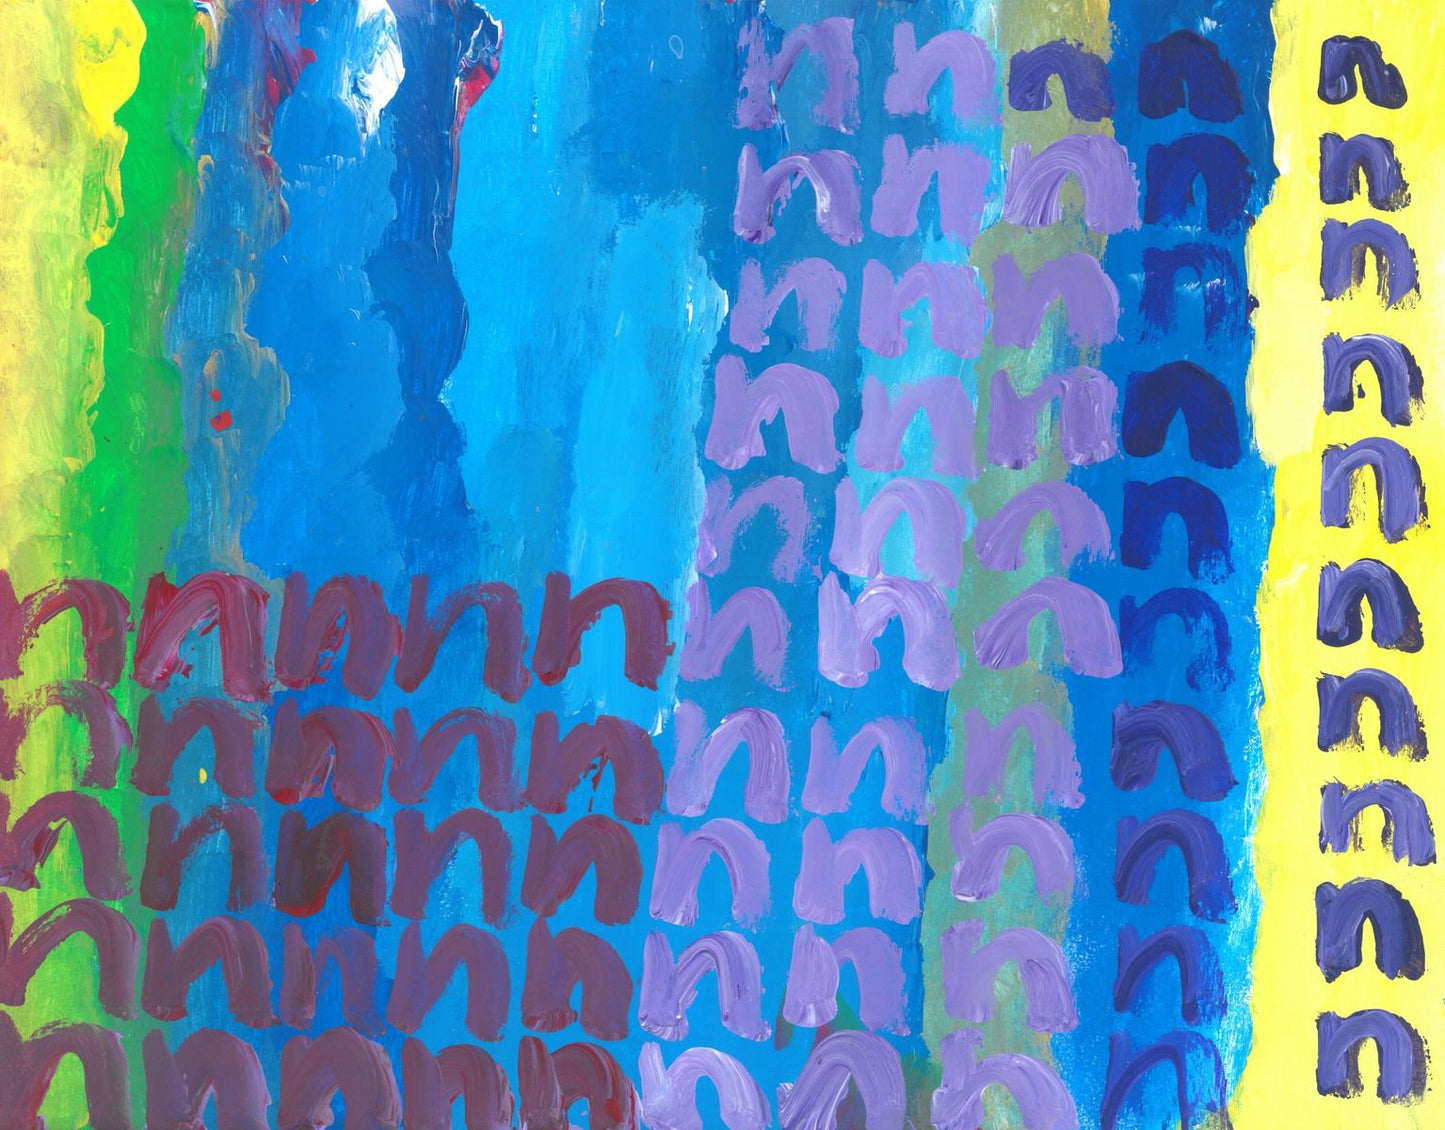 Acrylic on paper artwork with vertical stripes of yellow, green, and blue with maroon, lavender and purple N's overlaid